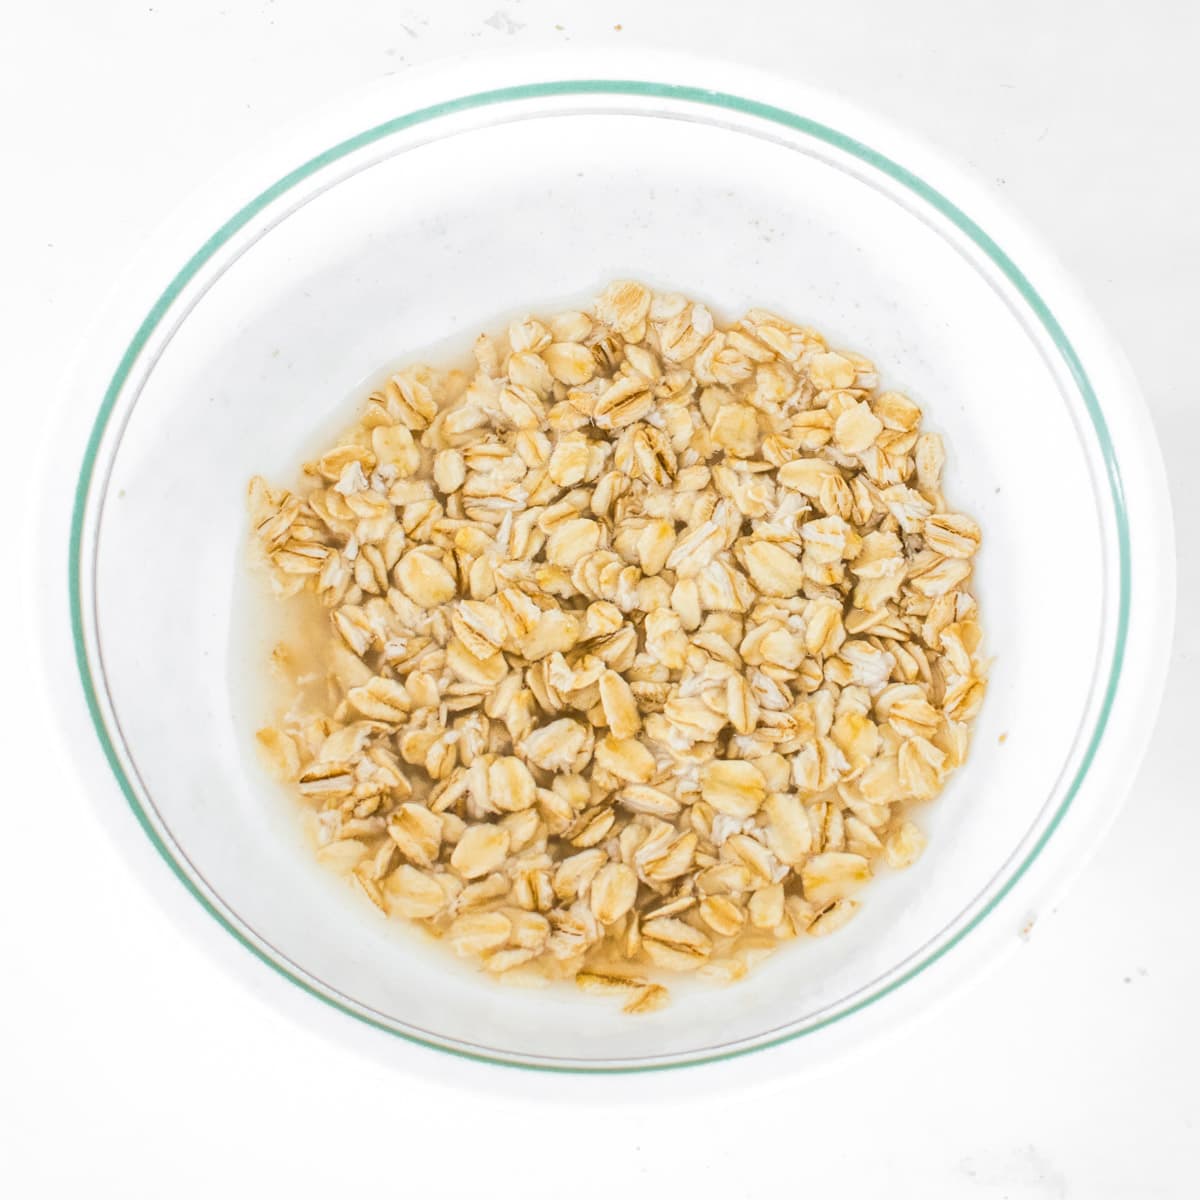 soaked oats in a bowl. 